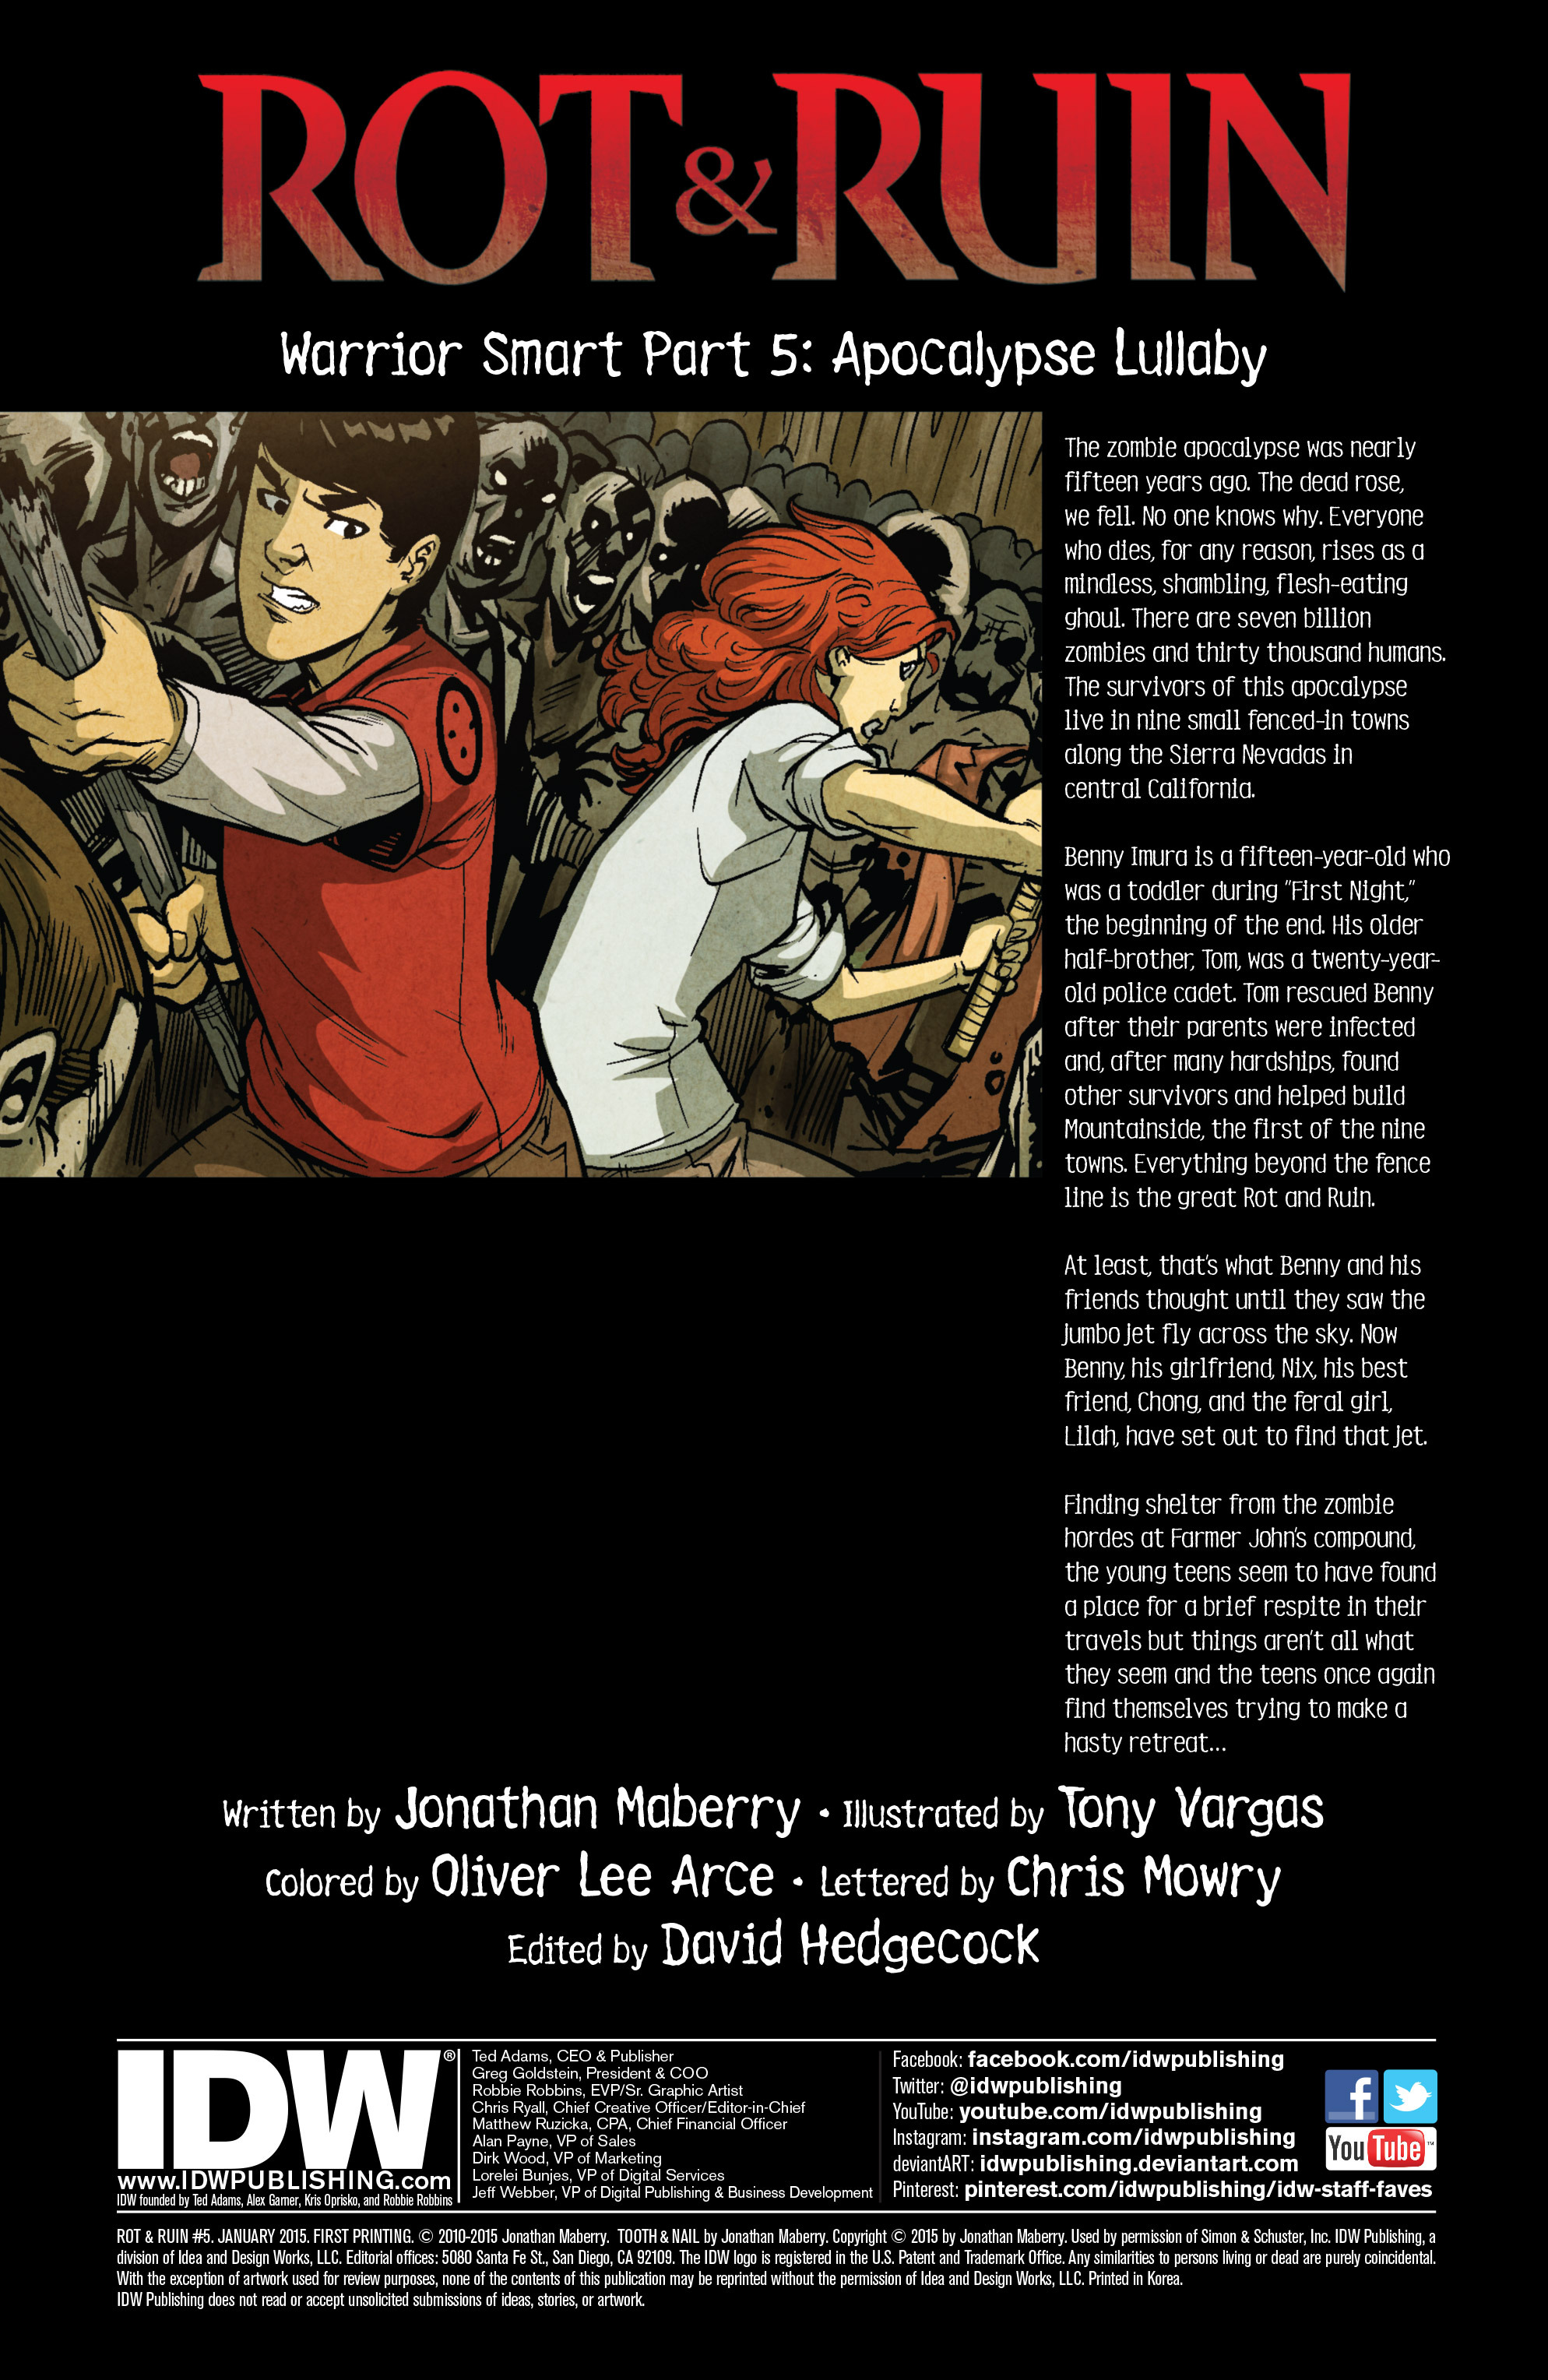 Read online Rot & Ruin comic -  Issue #5 - 2